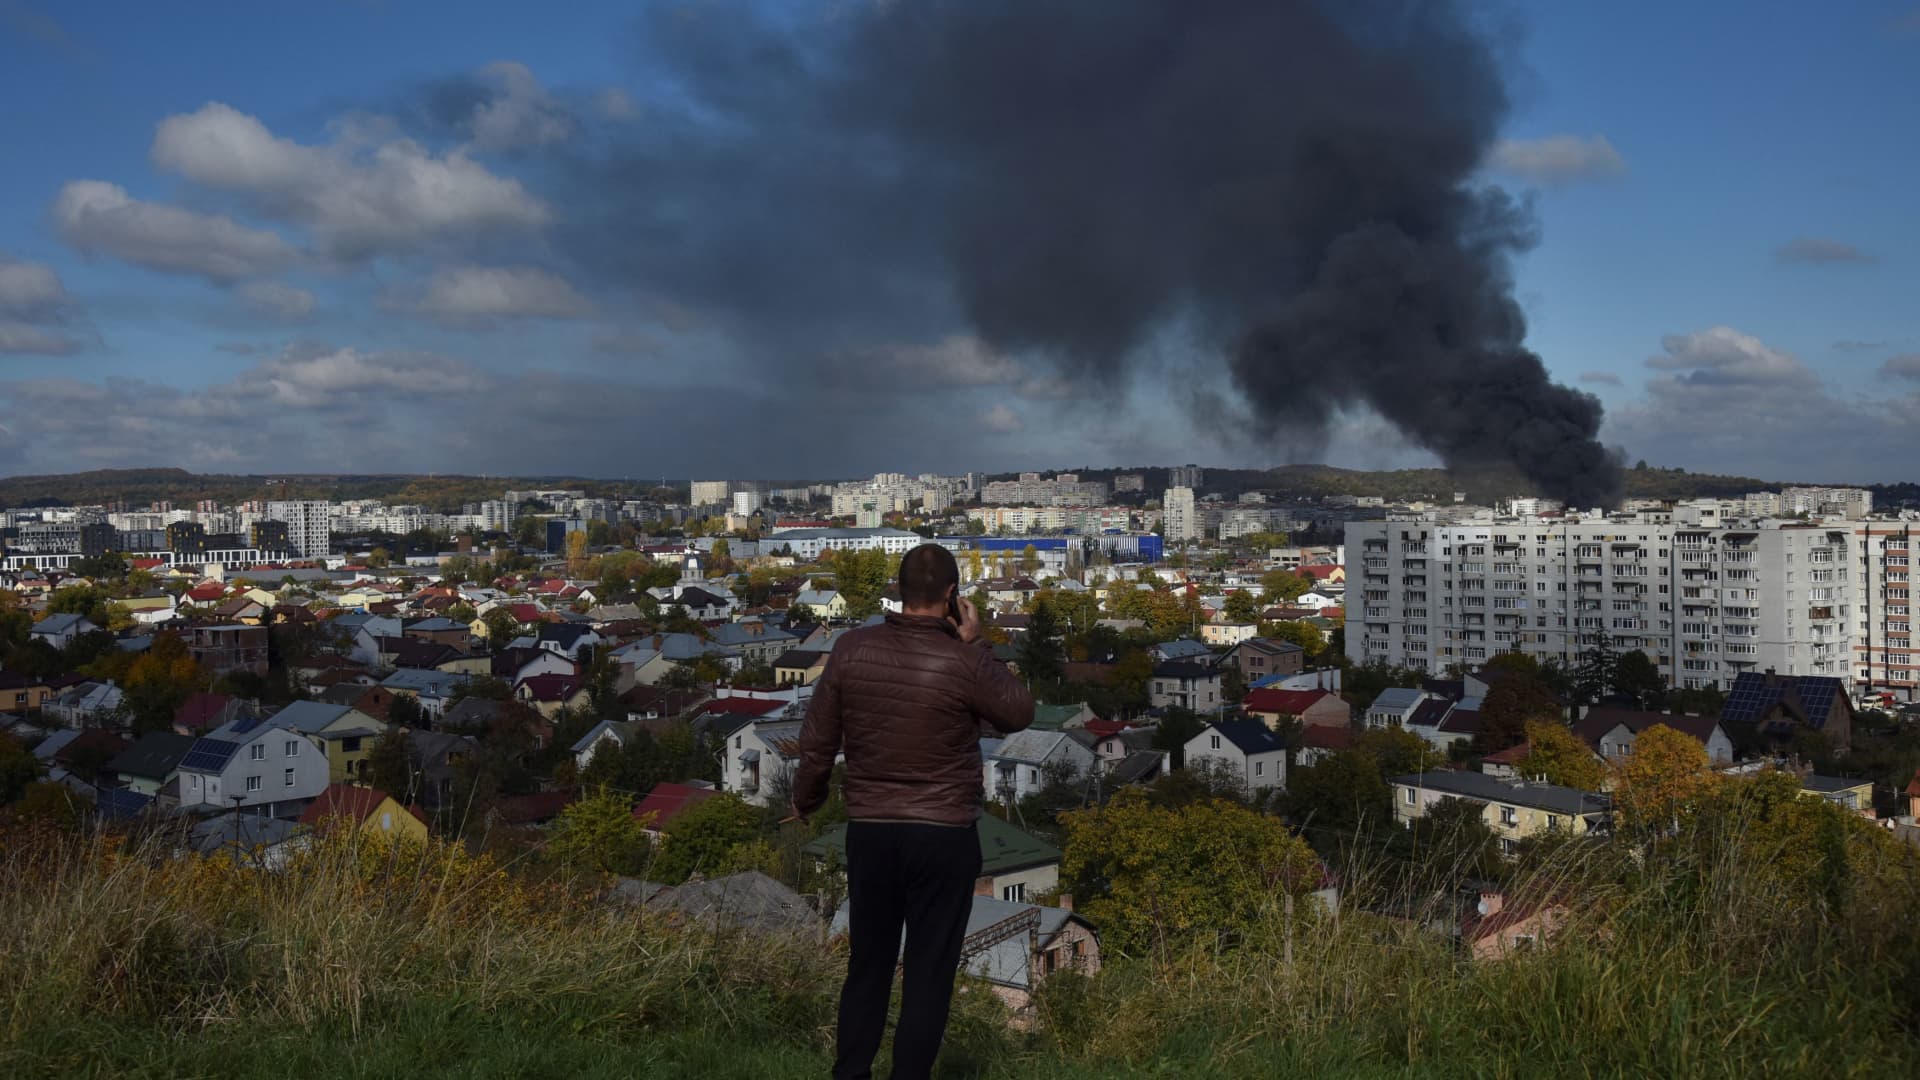 A man looks as smoke rises over the city after Russian missile strikes, amid Russia's attack on Ukraine, in Lviv, Ukraine October 10, 2022.